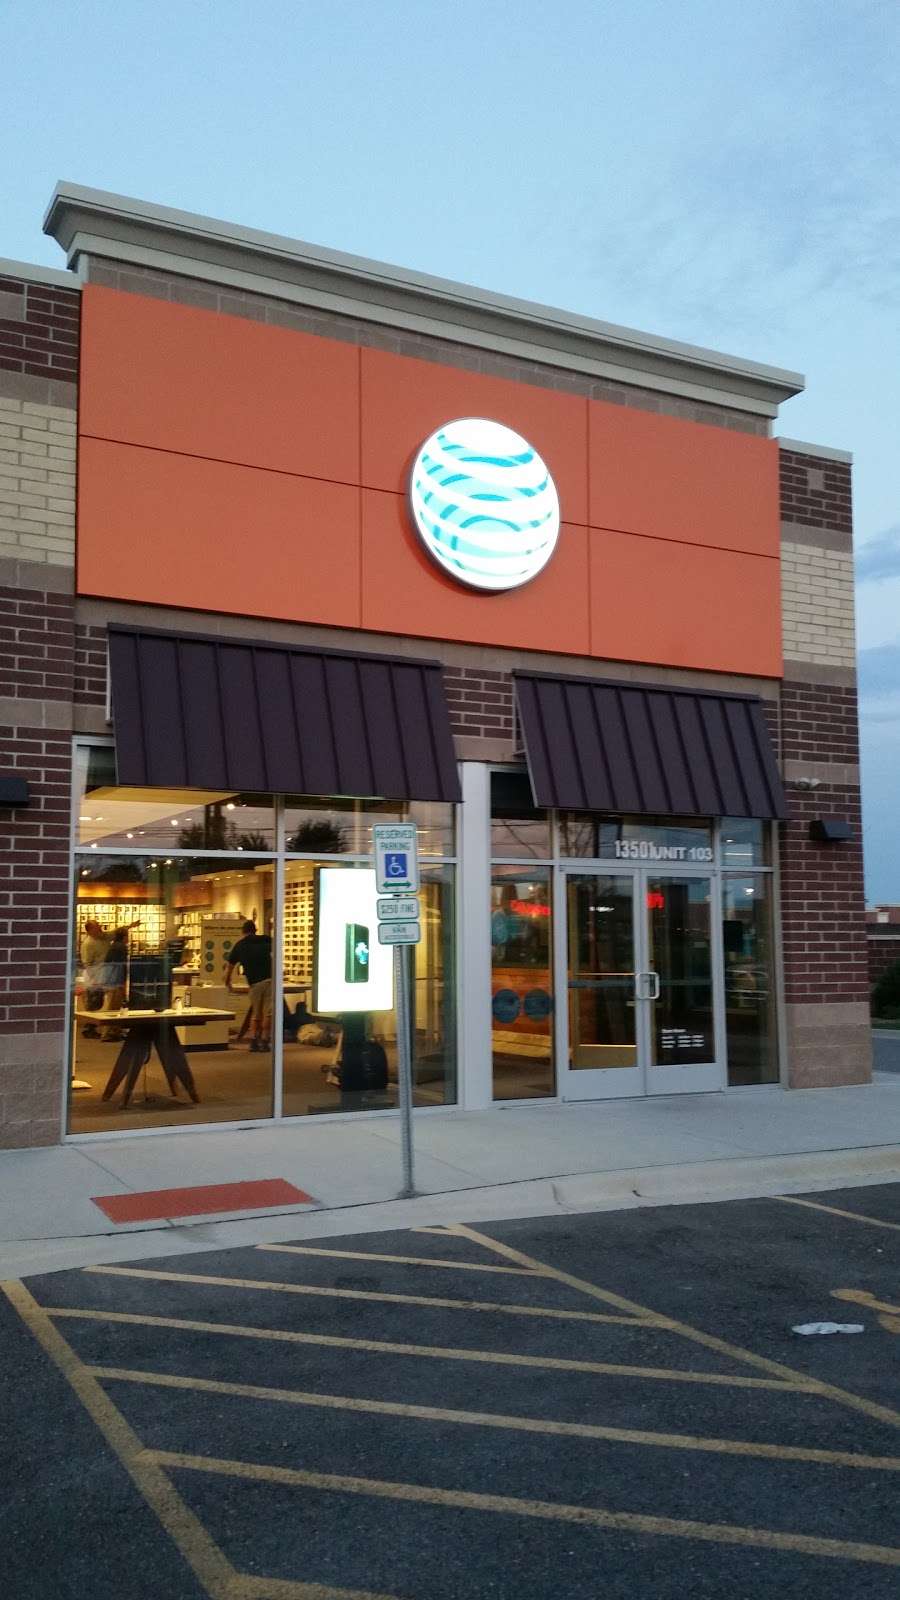 AT&T Store | 13501 S Route 59 Ste. 103, Plainfield, IL 60544 | Phone: (815) 439-7632